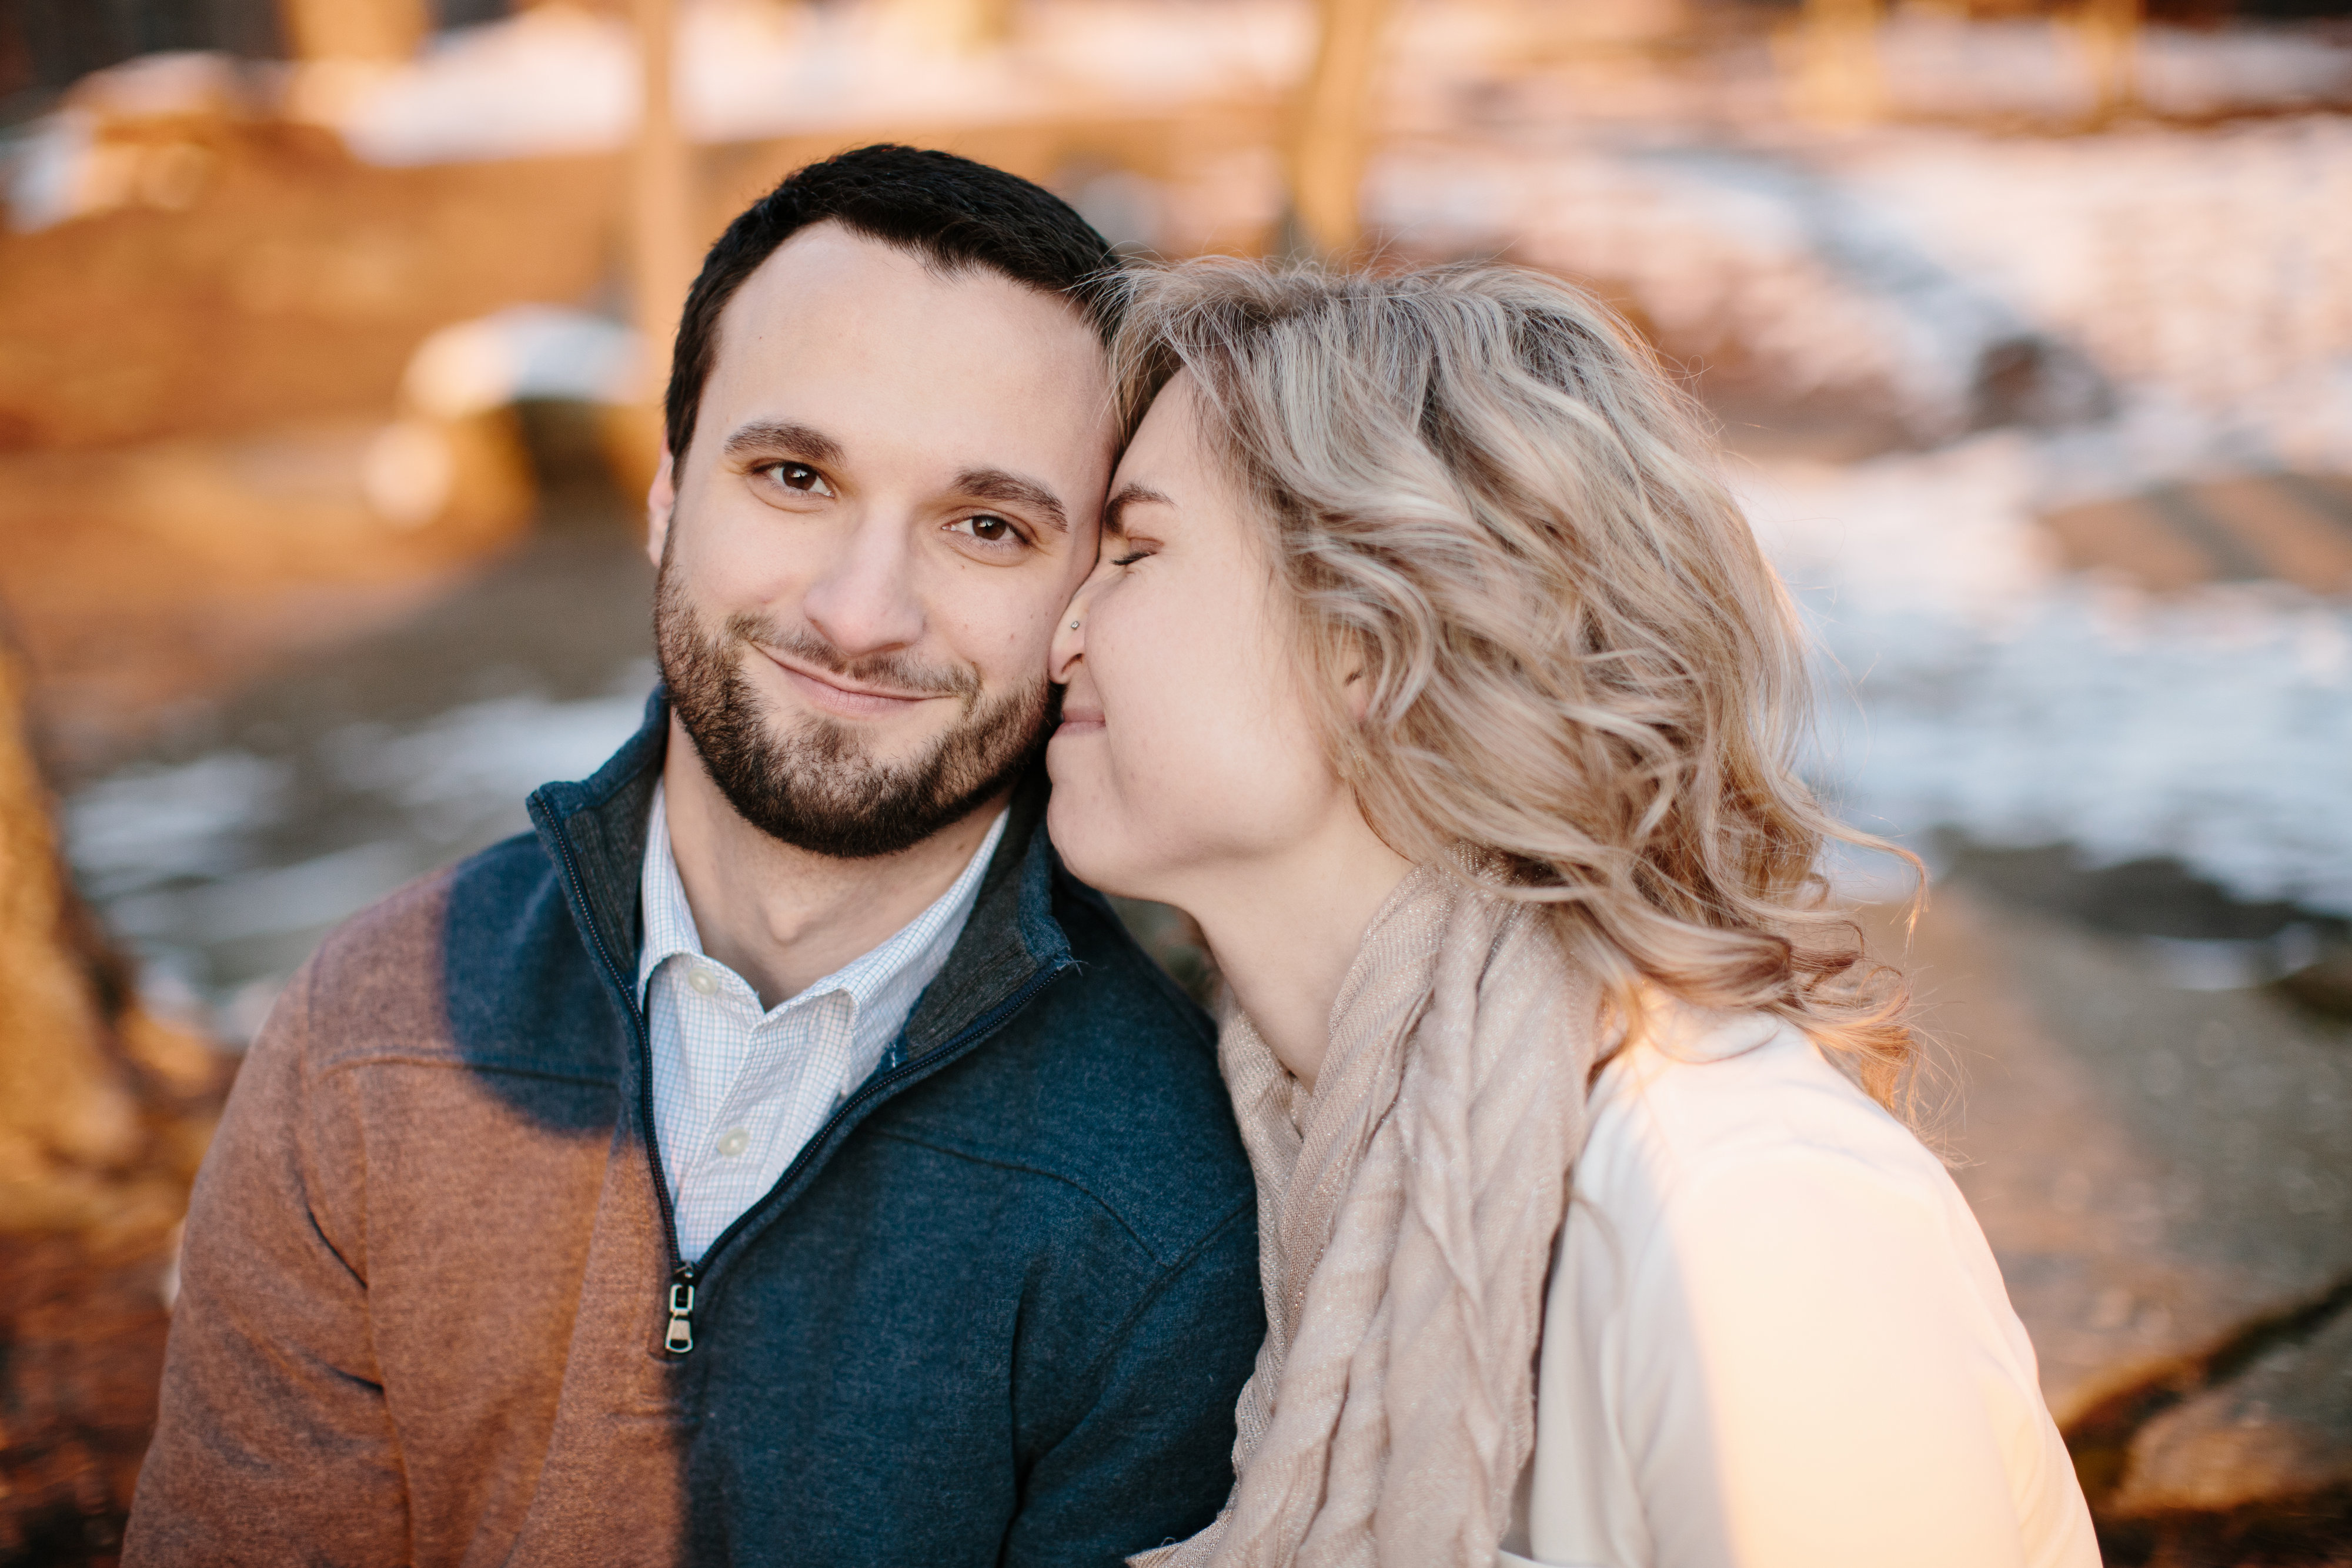 couple squishing noses during engagement session